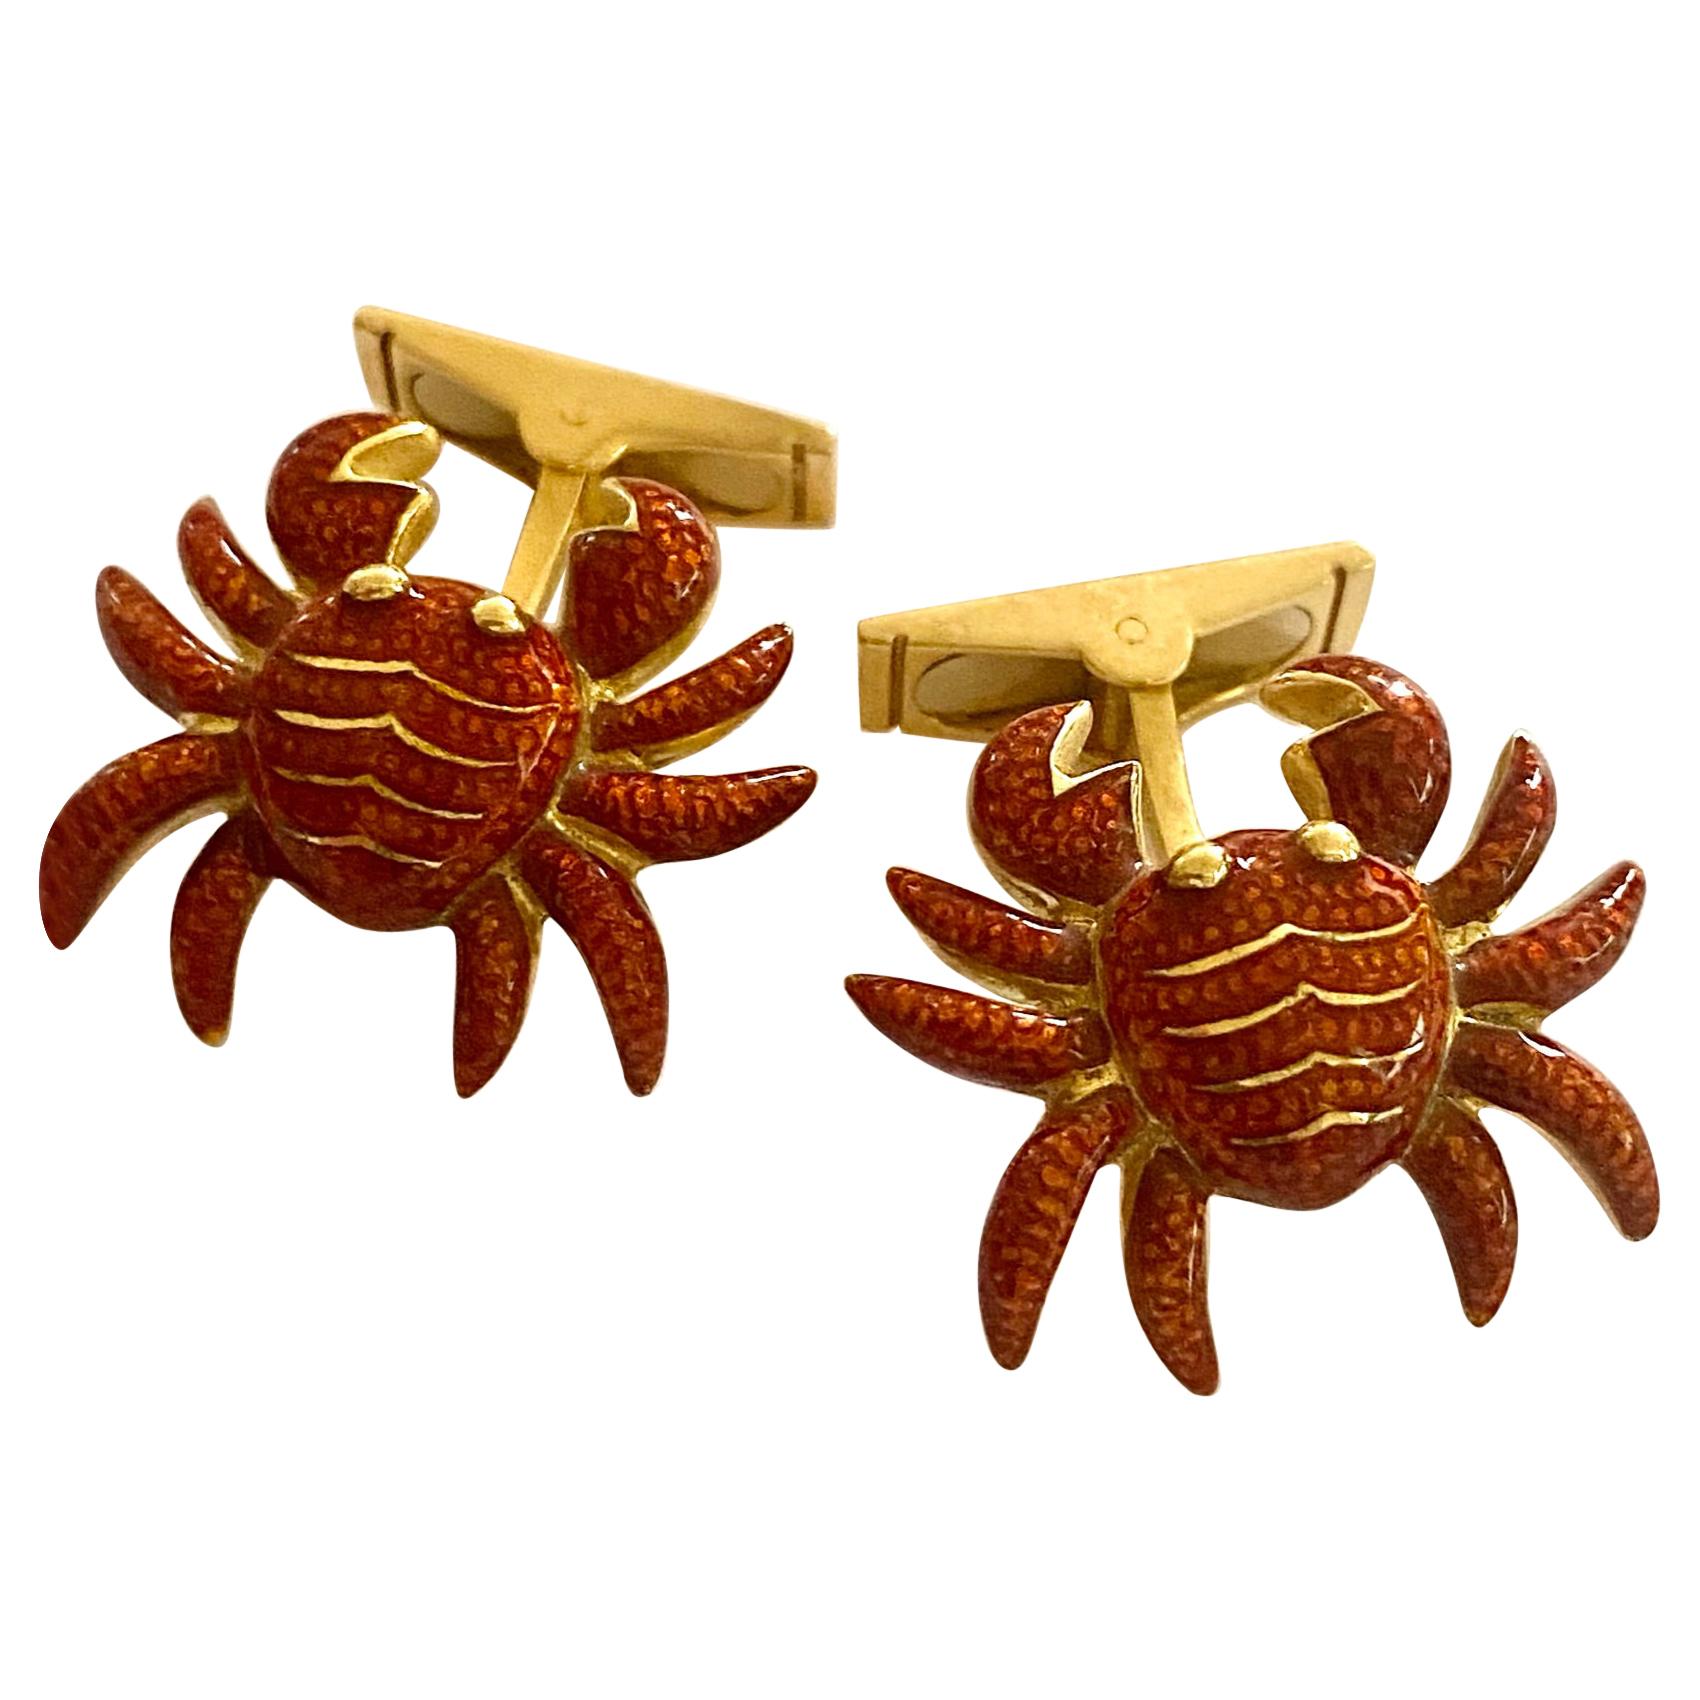 Cufflinks, Yellow Gold and Enamel in the Shape of a Crab Signed: Vaessen